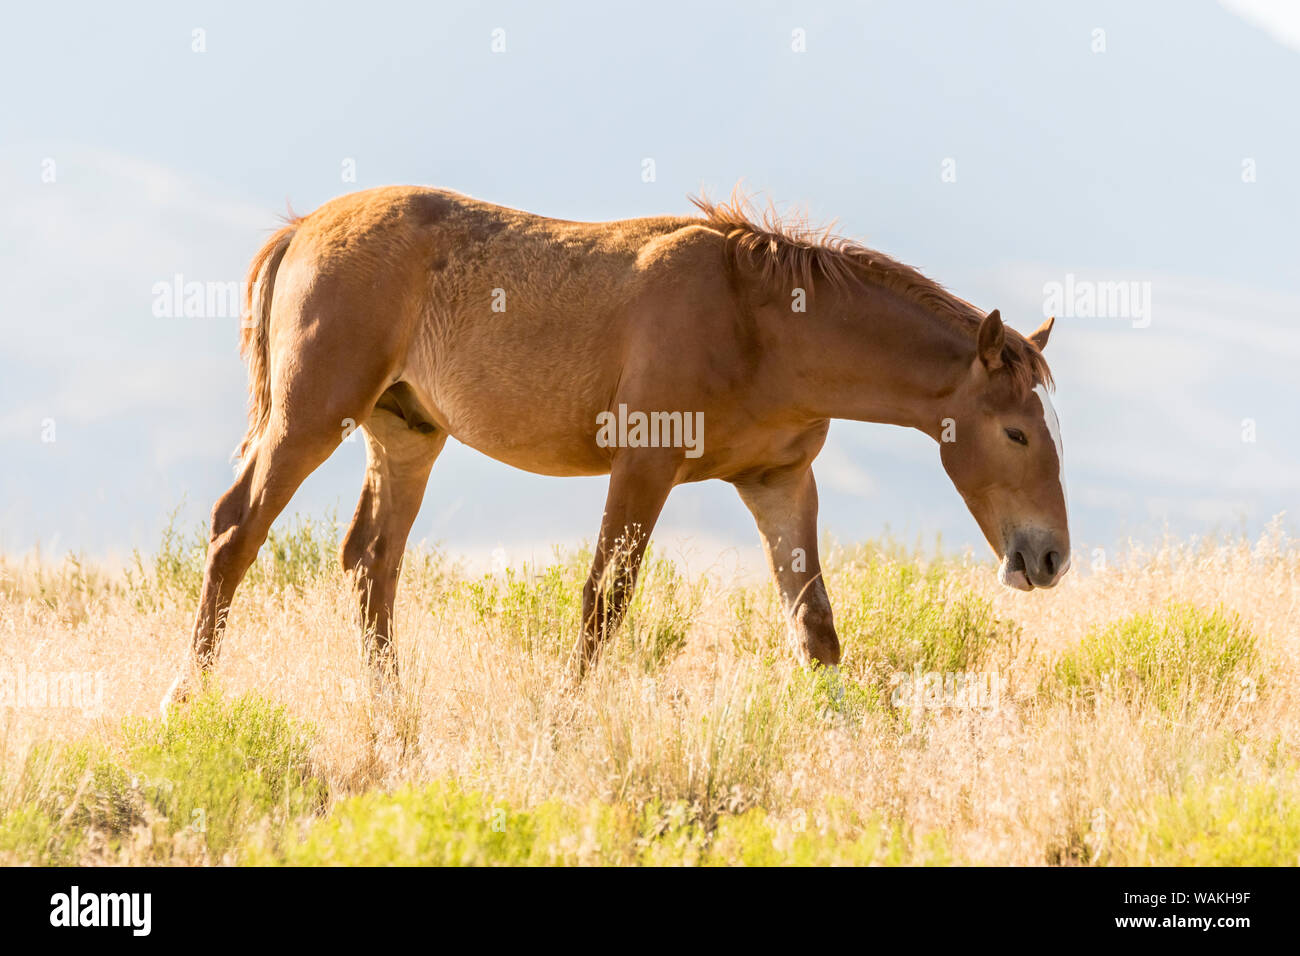 USA, Utah, Tooele County. Wild horse colt close-up. Credit as: Cathy and Gordon Illg / Jaynes Gallery / DanitaDelimont.com Stock Photo